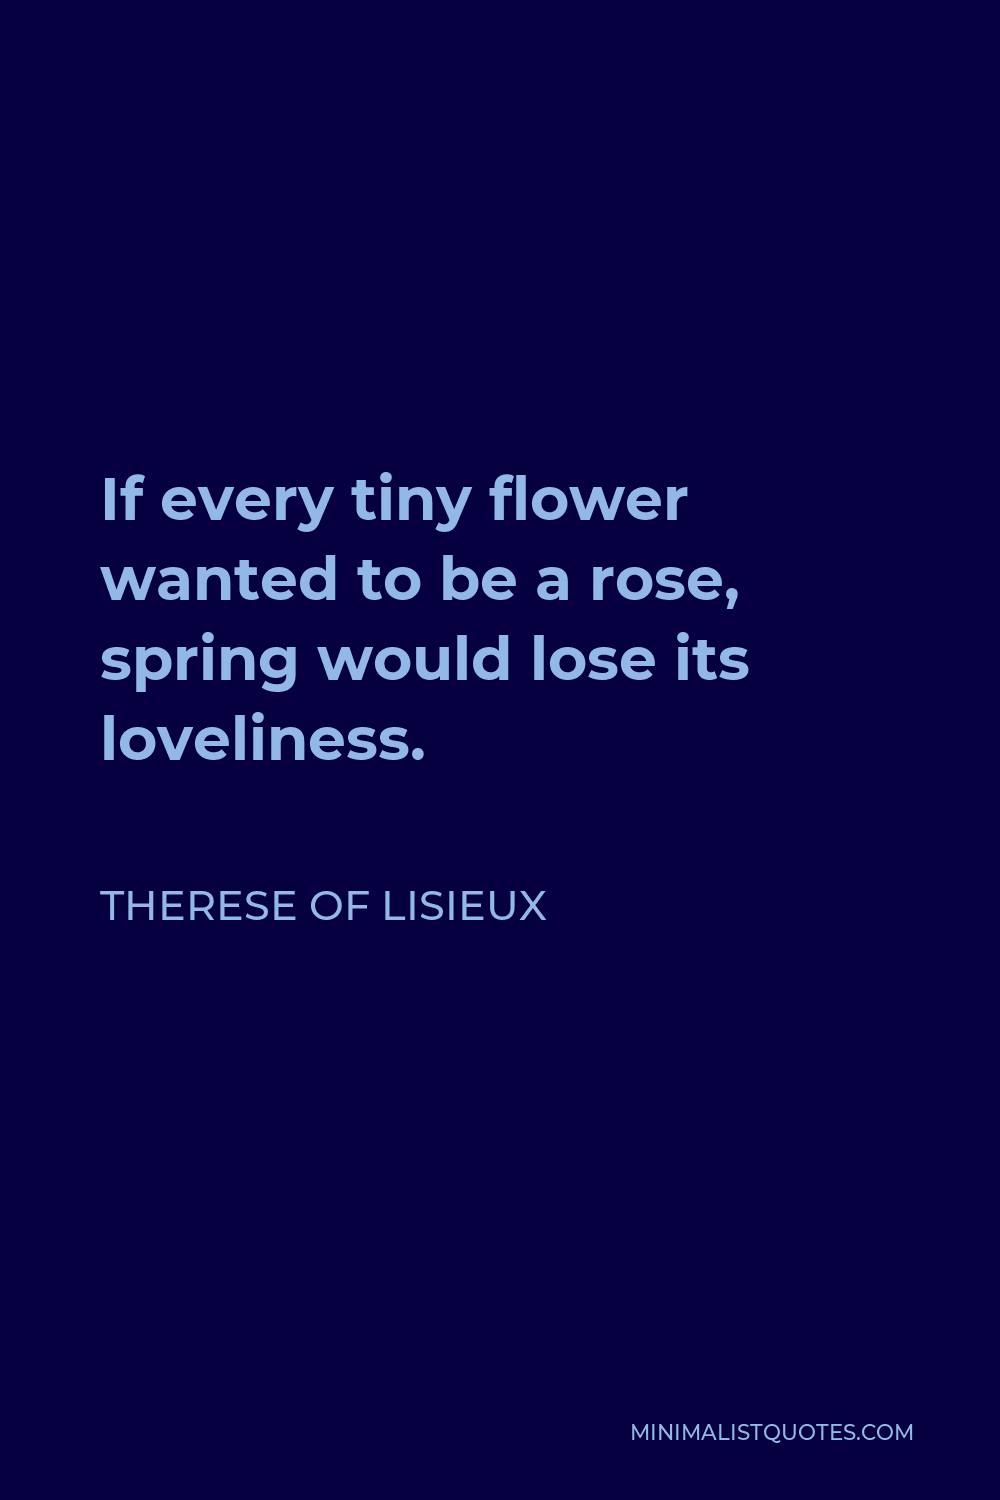 Therese of Lisieux Quote - If every tiny flower wanted to be a rose, spring would lose its loveliness.